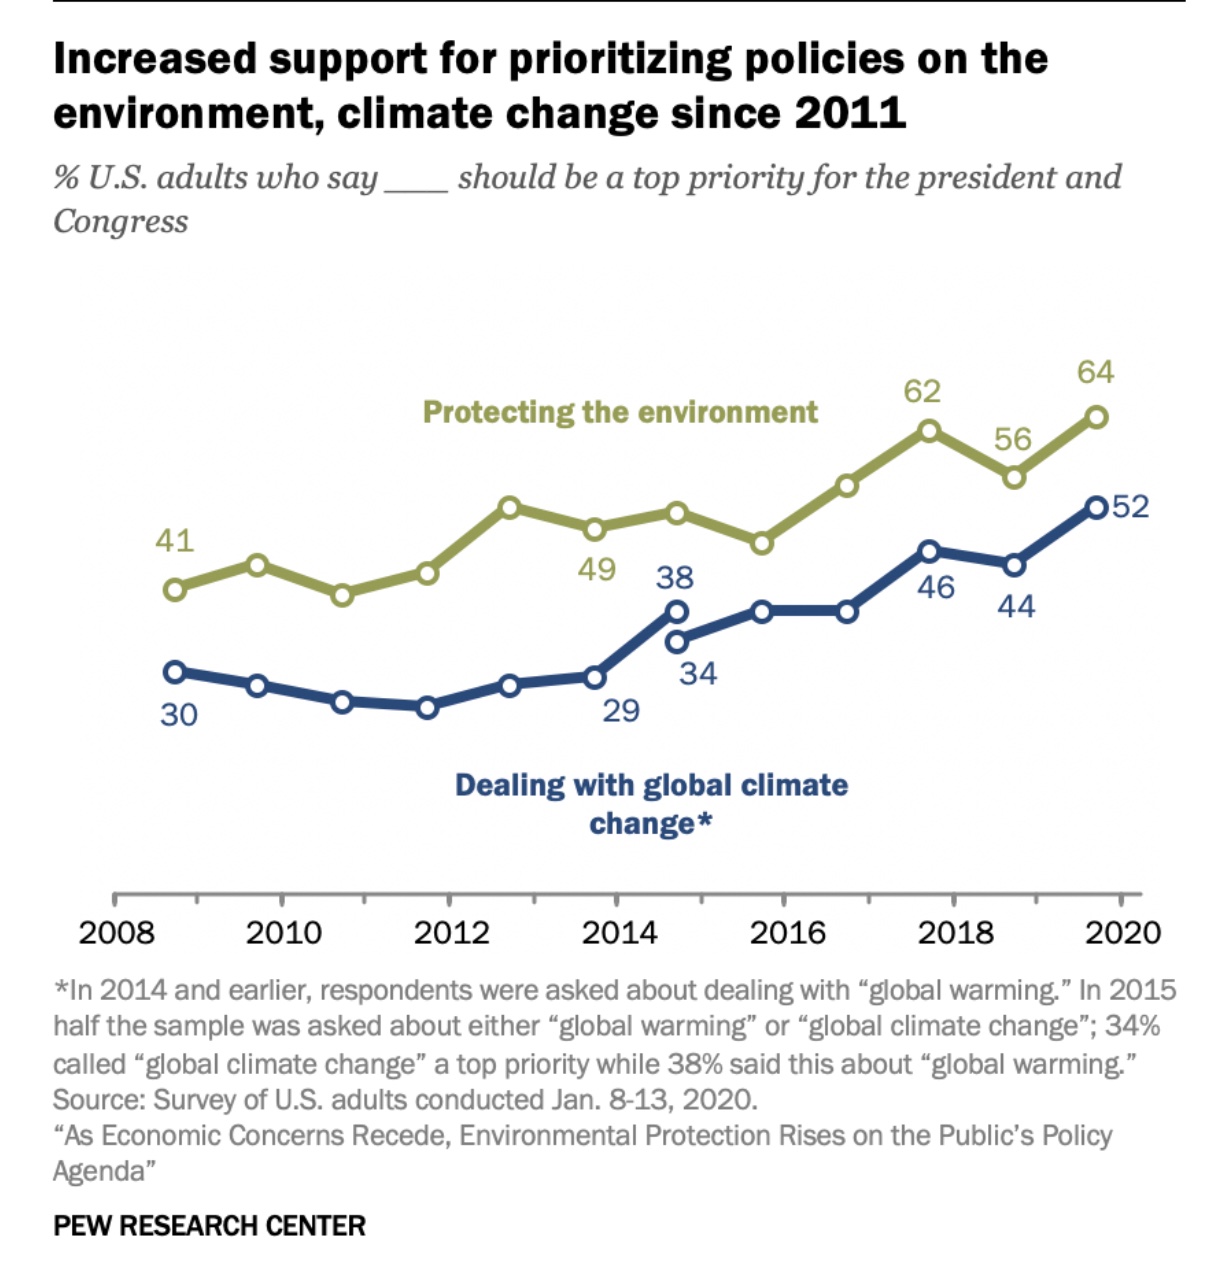 Increased support for prioritizing policies on climate change since 2011